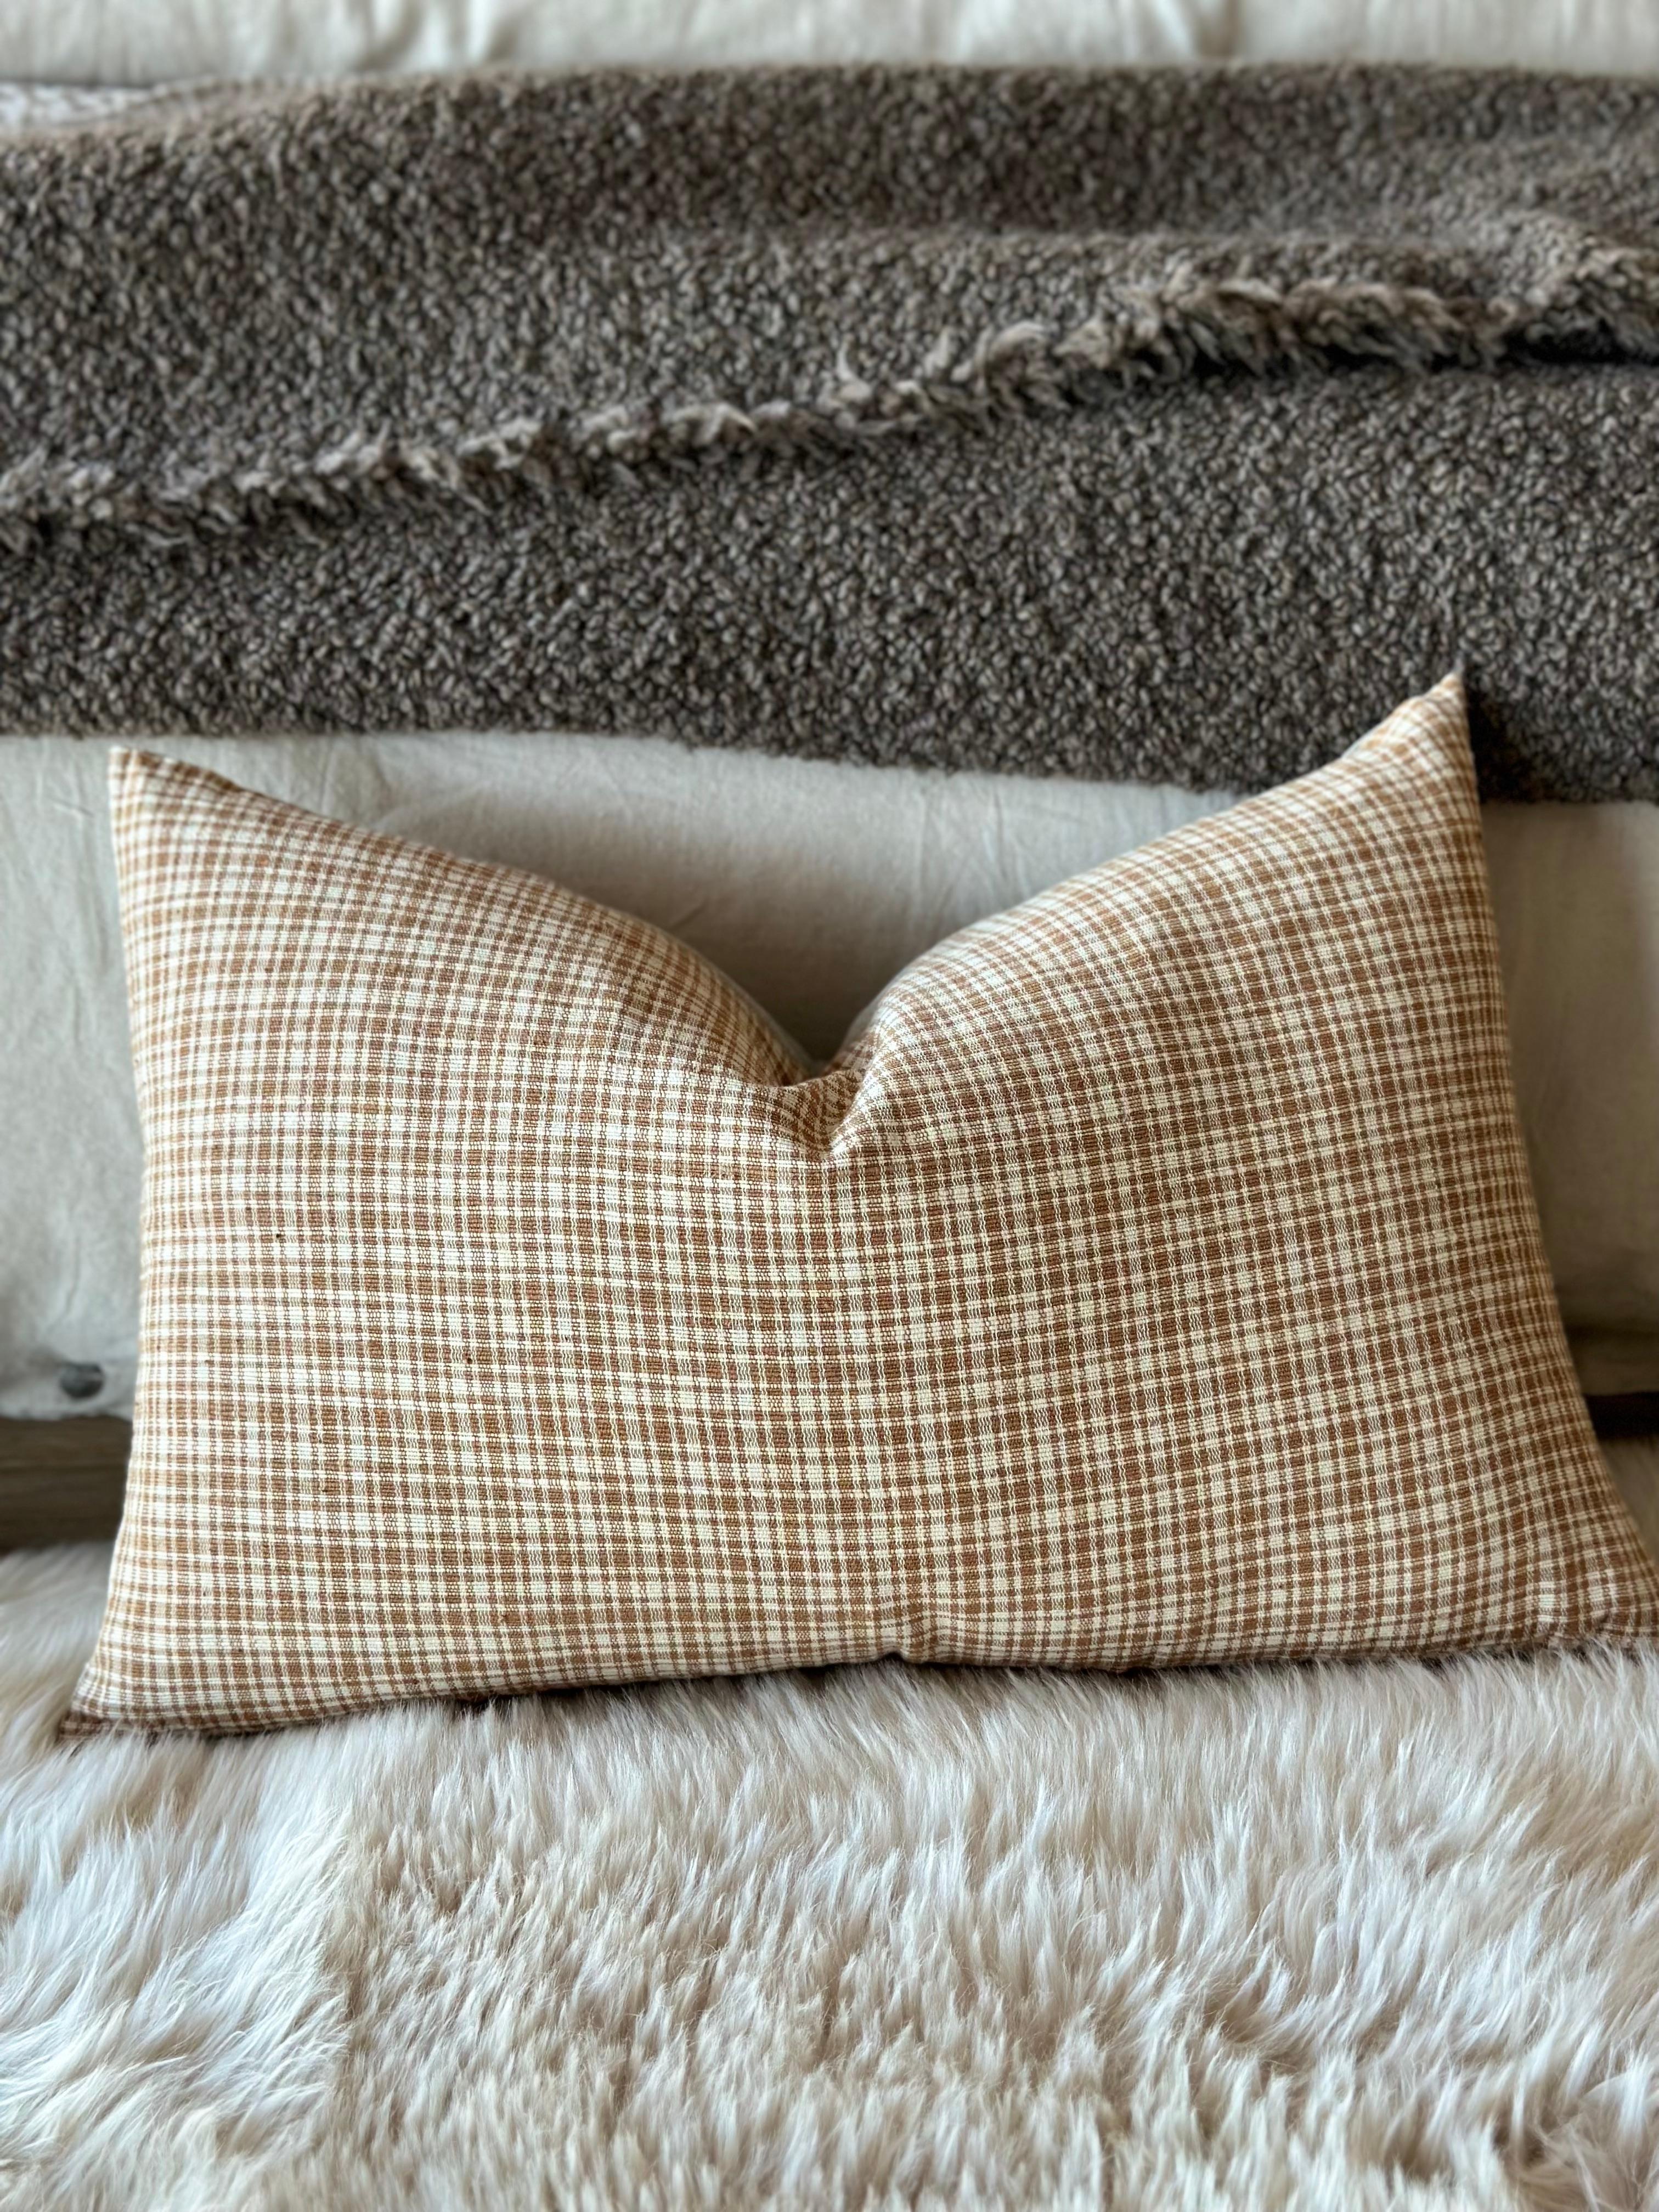 Tiburon Woven Brown Plaid Lumbar Pillow With Down Feather Insert In New Condition For Sale In Brea, CA